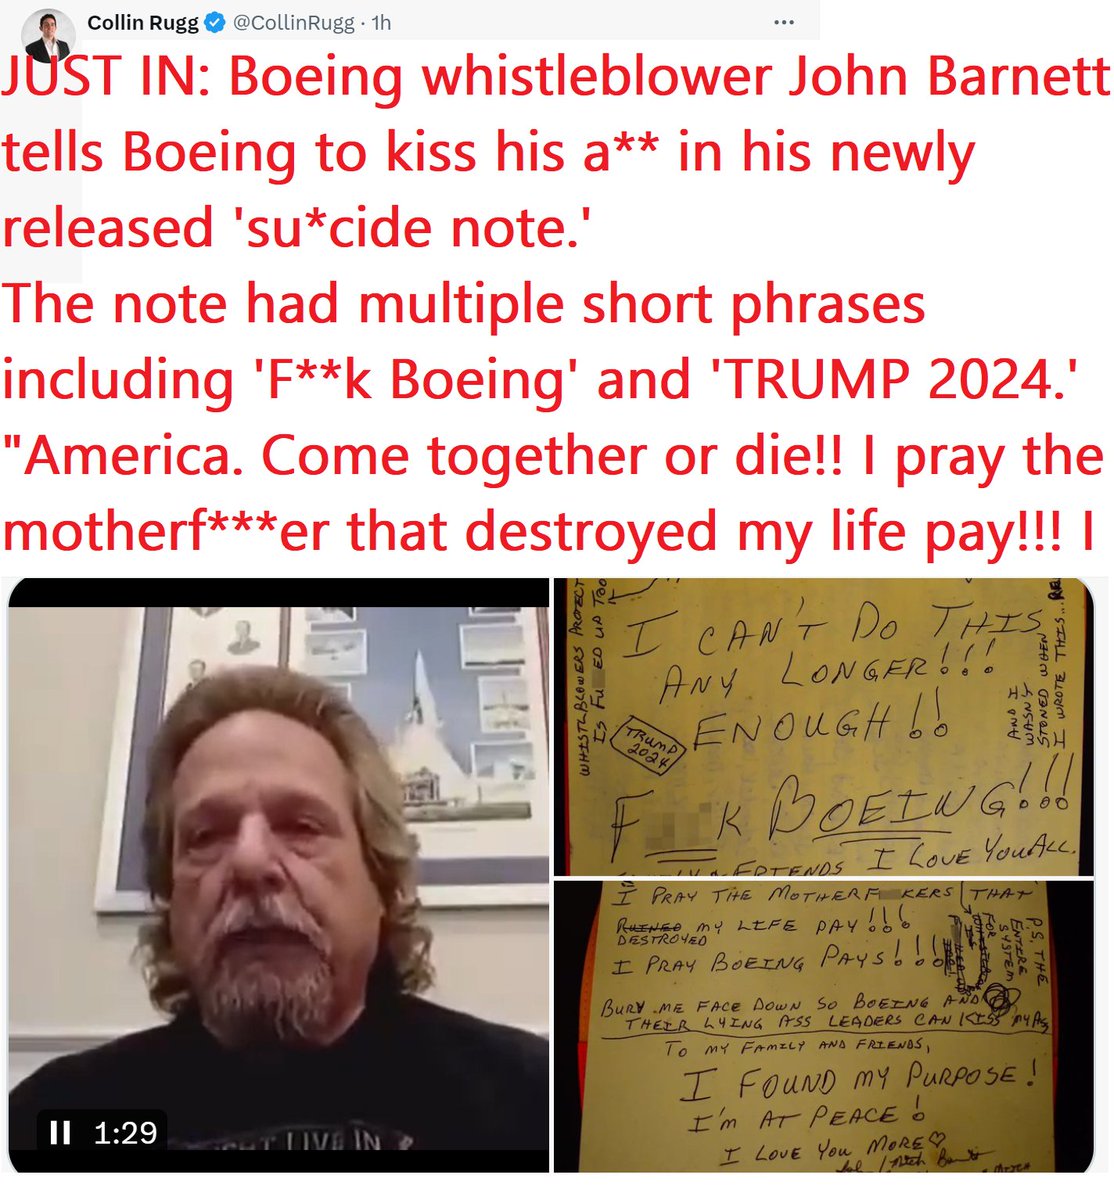 🇺🇸❤️PATRIOT FOLLOW TRAIN❤️🇺🇸

🇺🇸❤️HAPPY RED FRIDAY EVENING !❤️🇺🇸

🇺🇸❤️DROP YOUR HANDLES ❤️🇺🇸 

🇺🇸❤️FOLLOW OTHER PATRIOTS❤️🇺🇸

🔥❤️LIKE & RETWEET IFBAP❤️🔥

🇺🇸❤️PRAY FOR TRUMP❤️🇺🇸

JUST IN: Boeing whistleblower John Barnett tells Boeing to kiss his a** in his newly released